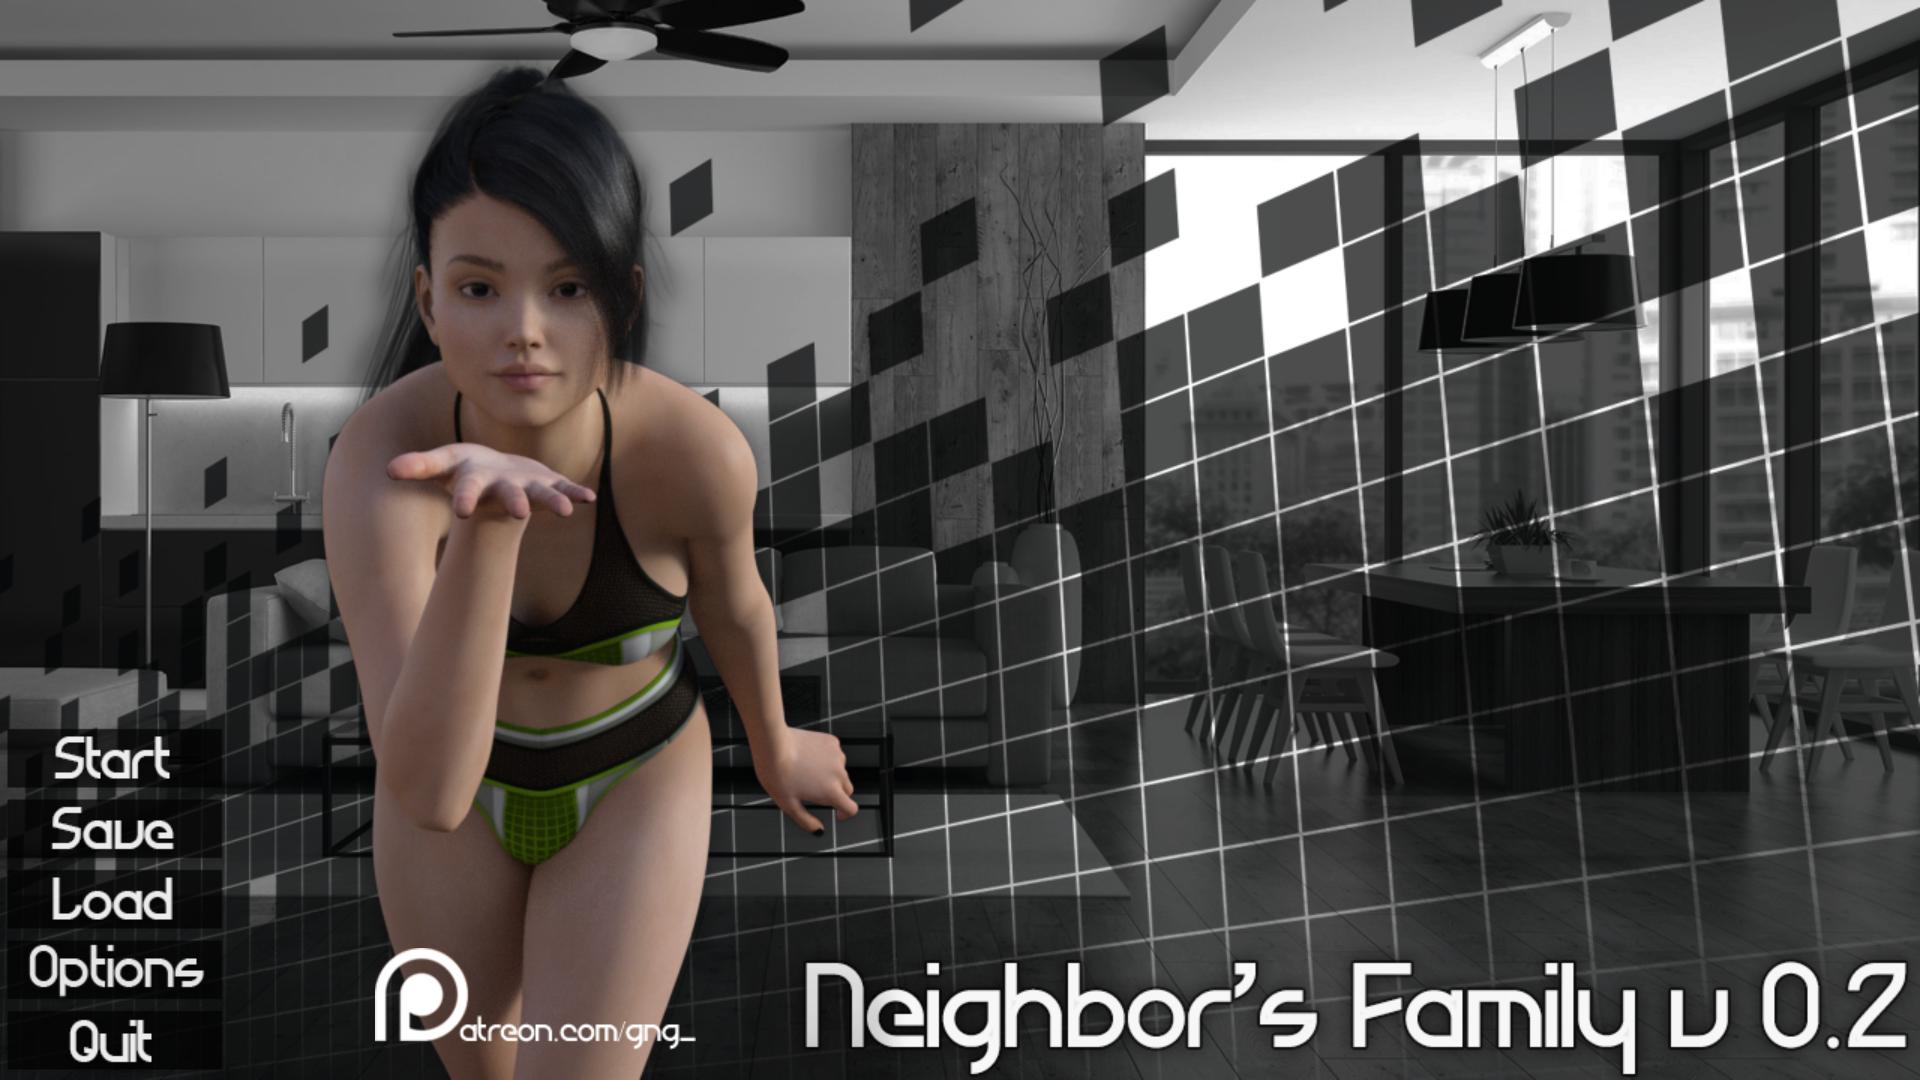 Neighbor’s Family from GnG version 0.2